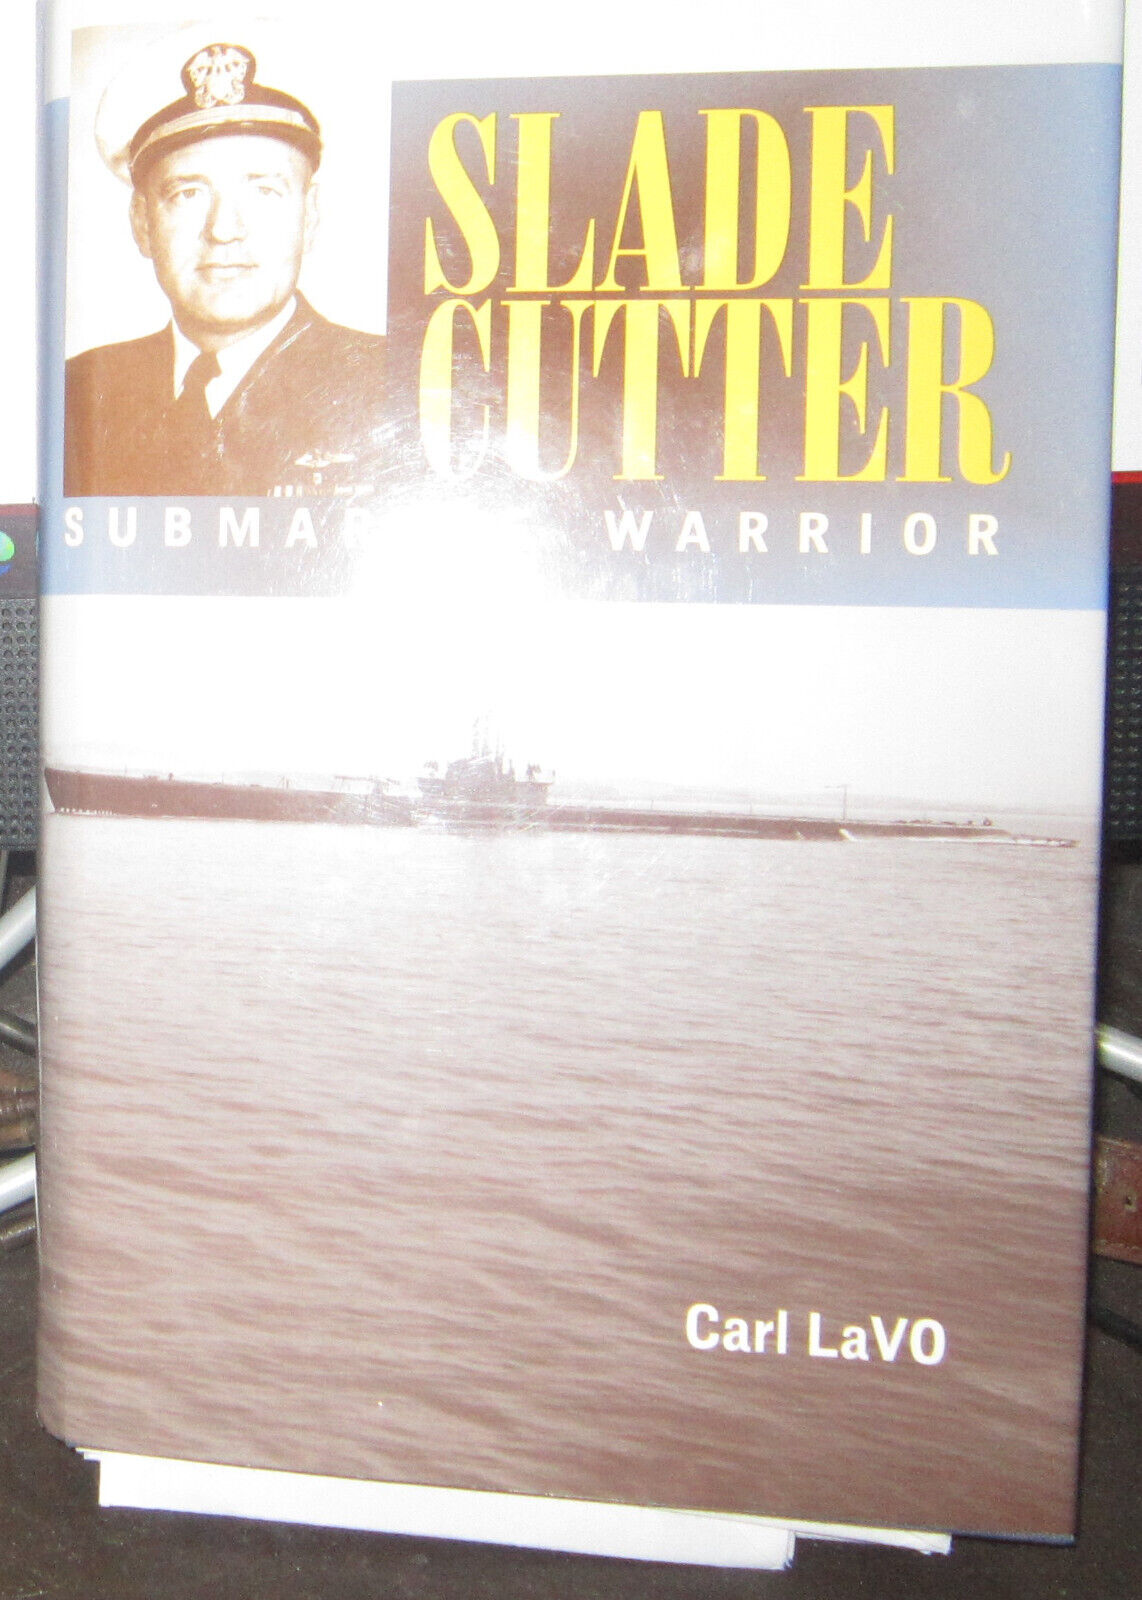 Book about WWII submarine hero Slade Cutter - inscribed+ original Cutter letters